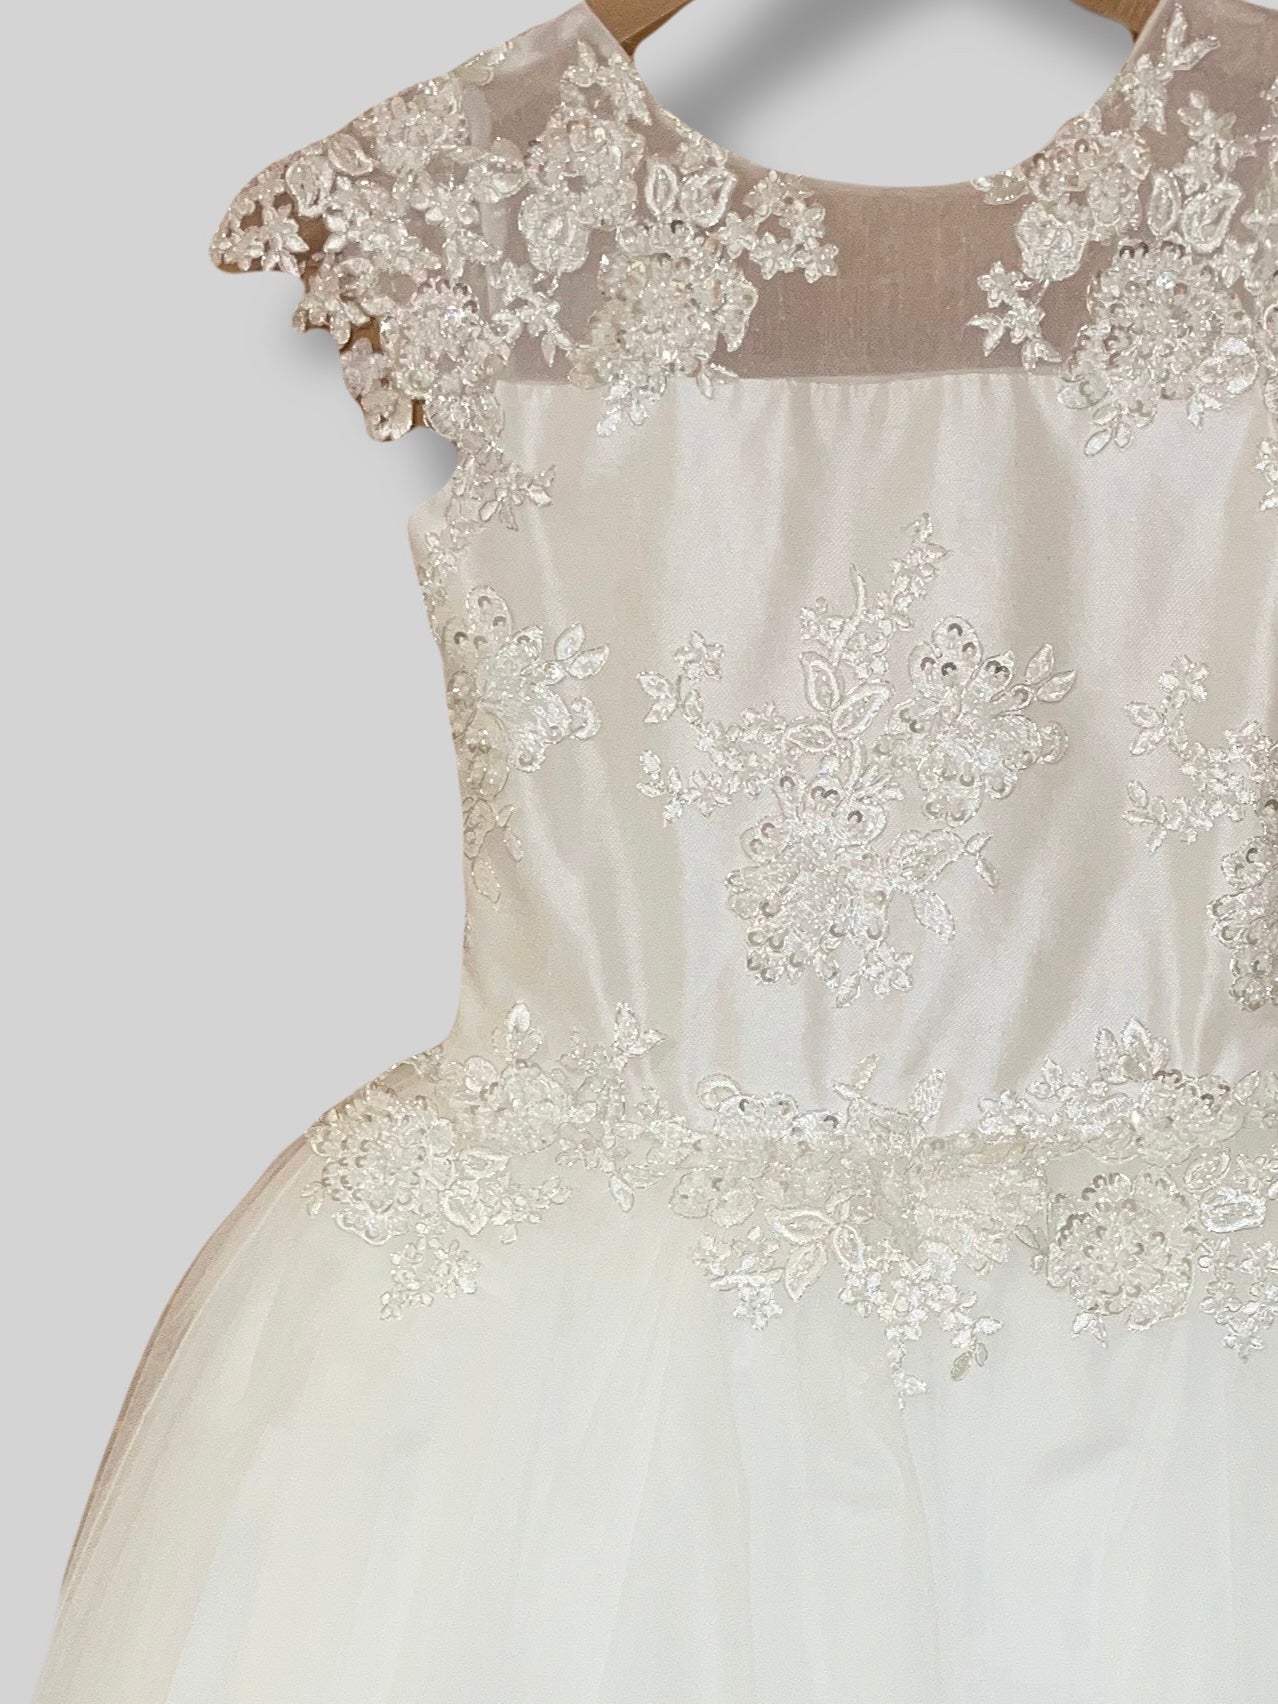 Silk with Lace Overlay Bodice Dress